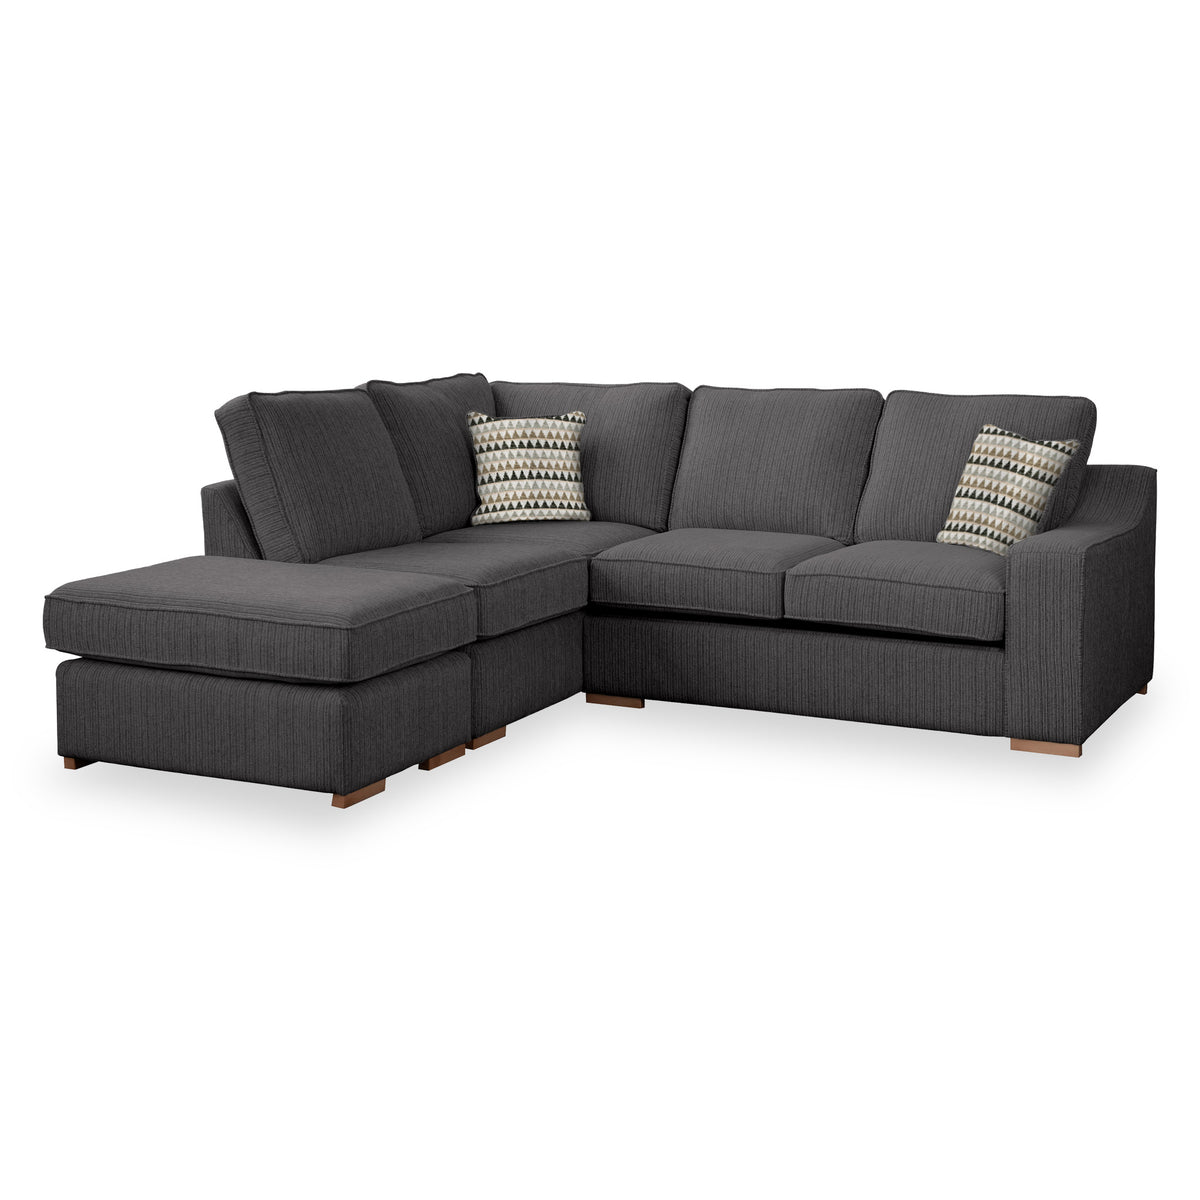 Ashow Charcoal Left Hand Corner Sofabed with Maika Beige Scatter Cushions from Roseland furniture